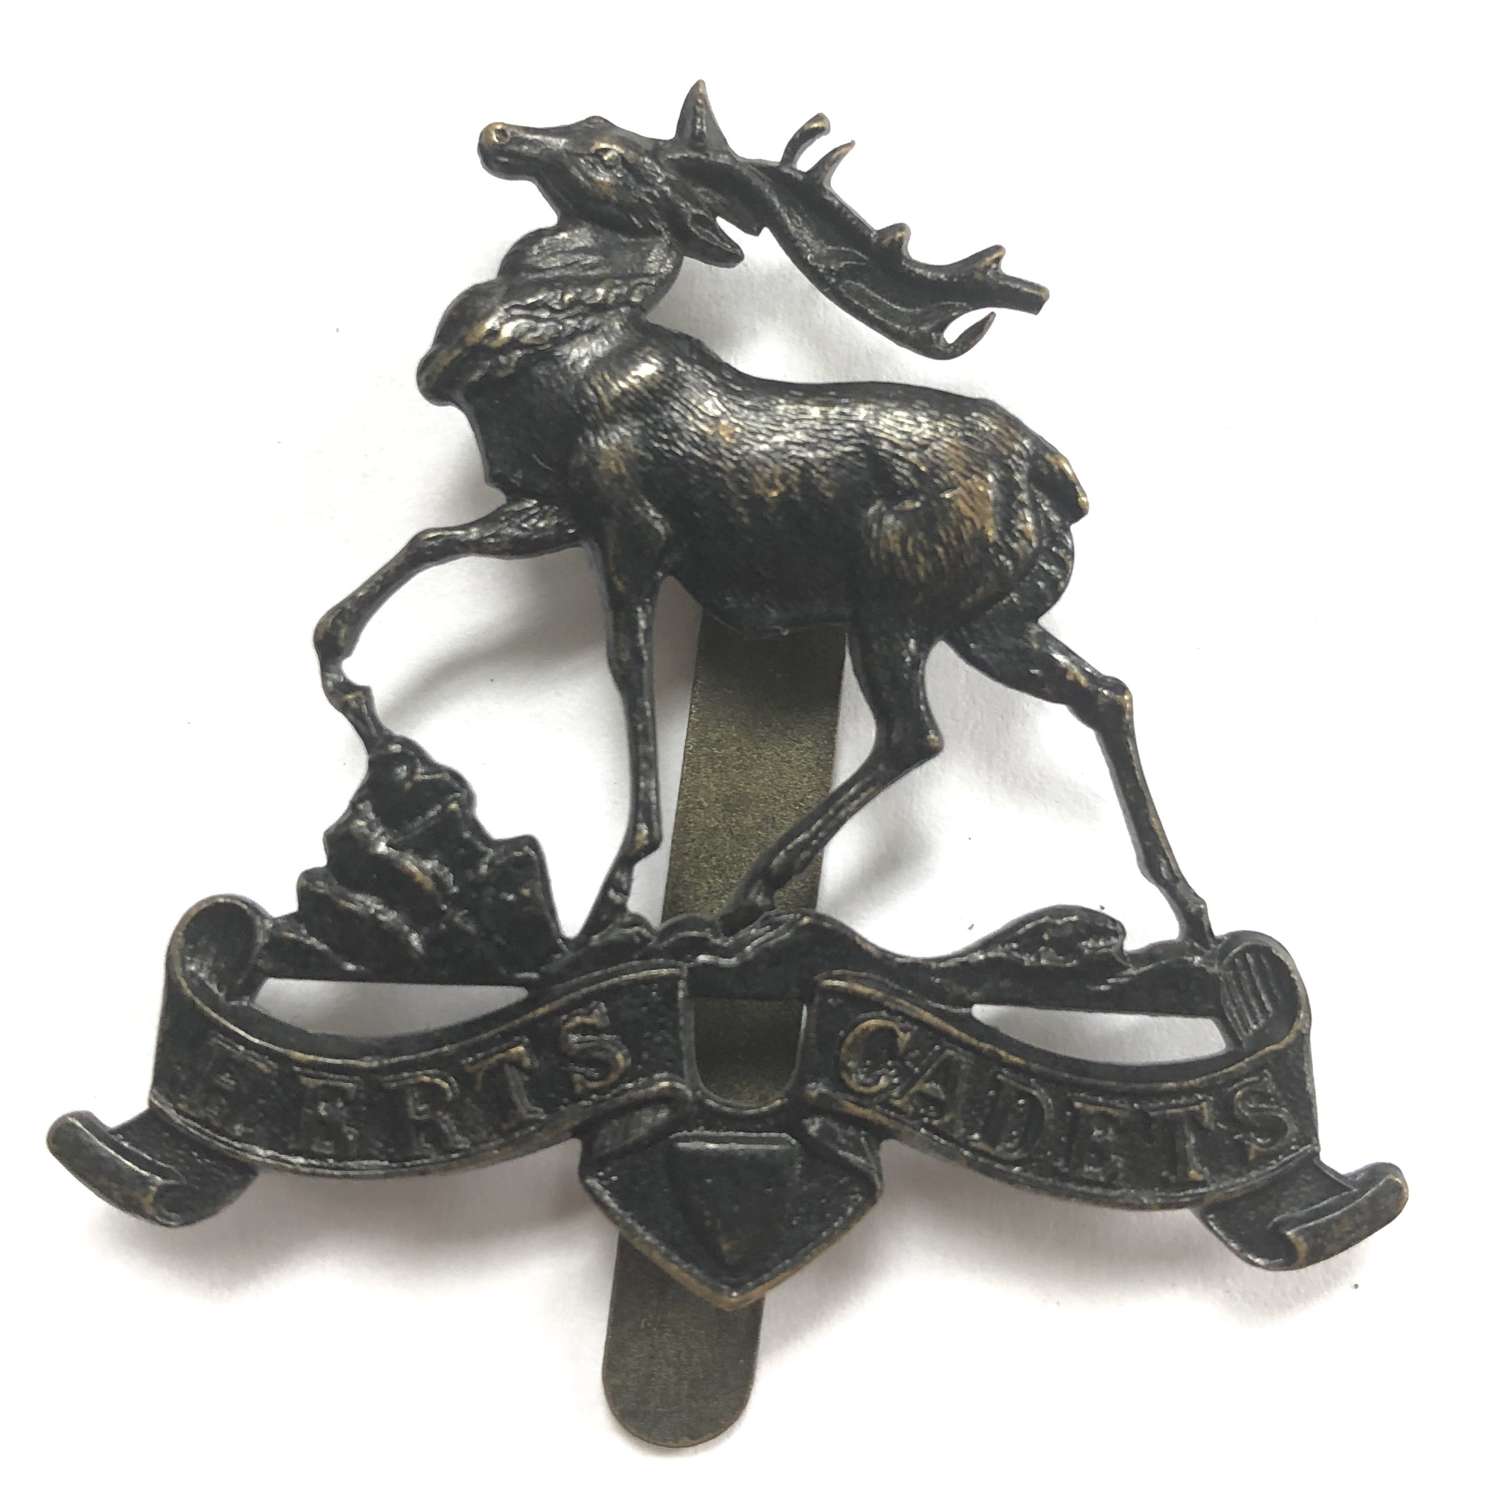 Hertfordshire Cadets cap badge by Firmin, London circa 1930-32